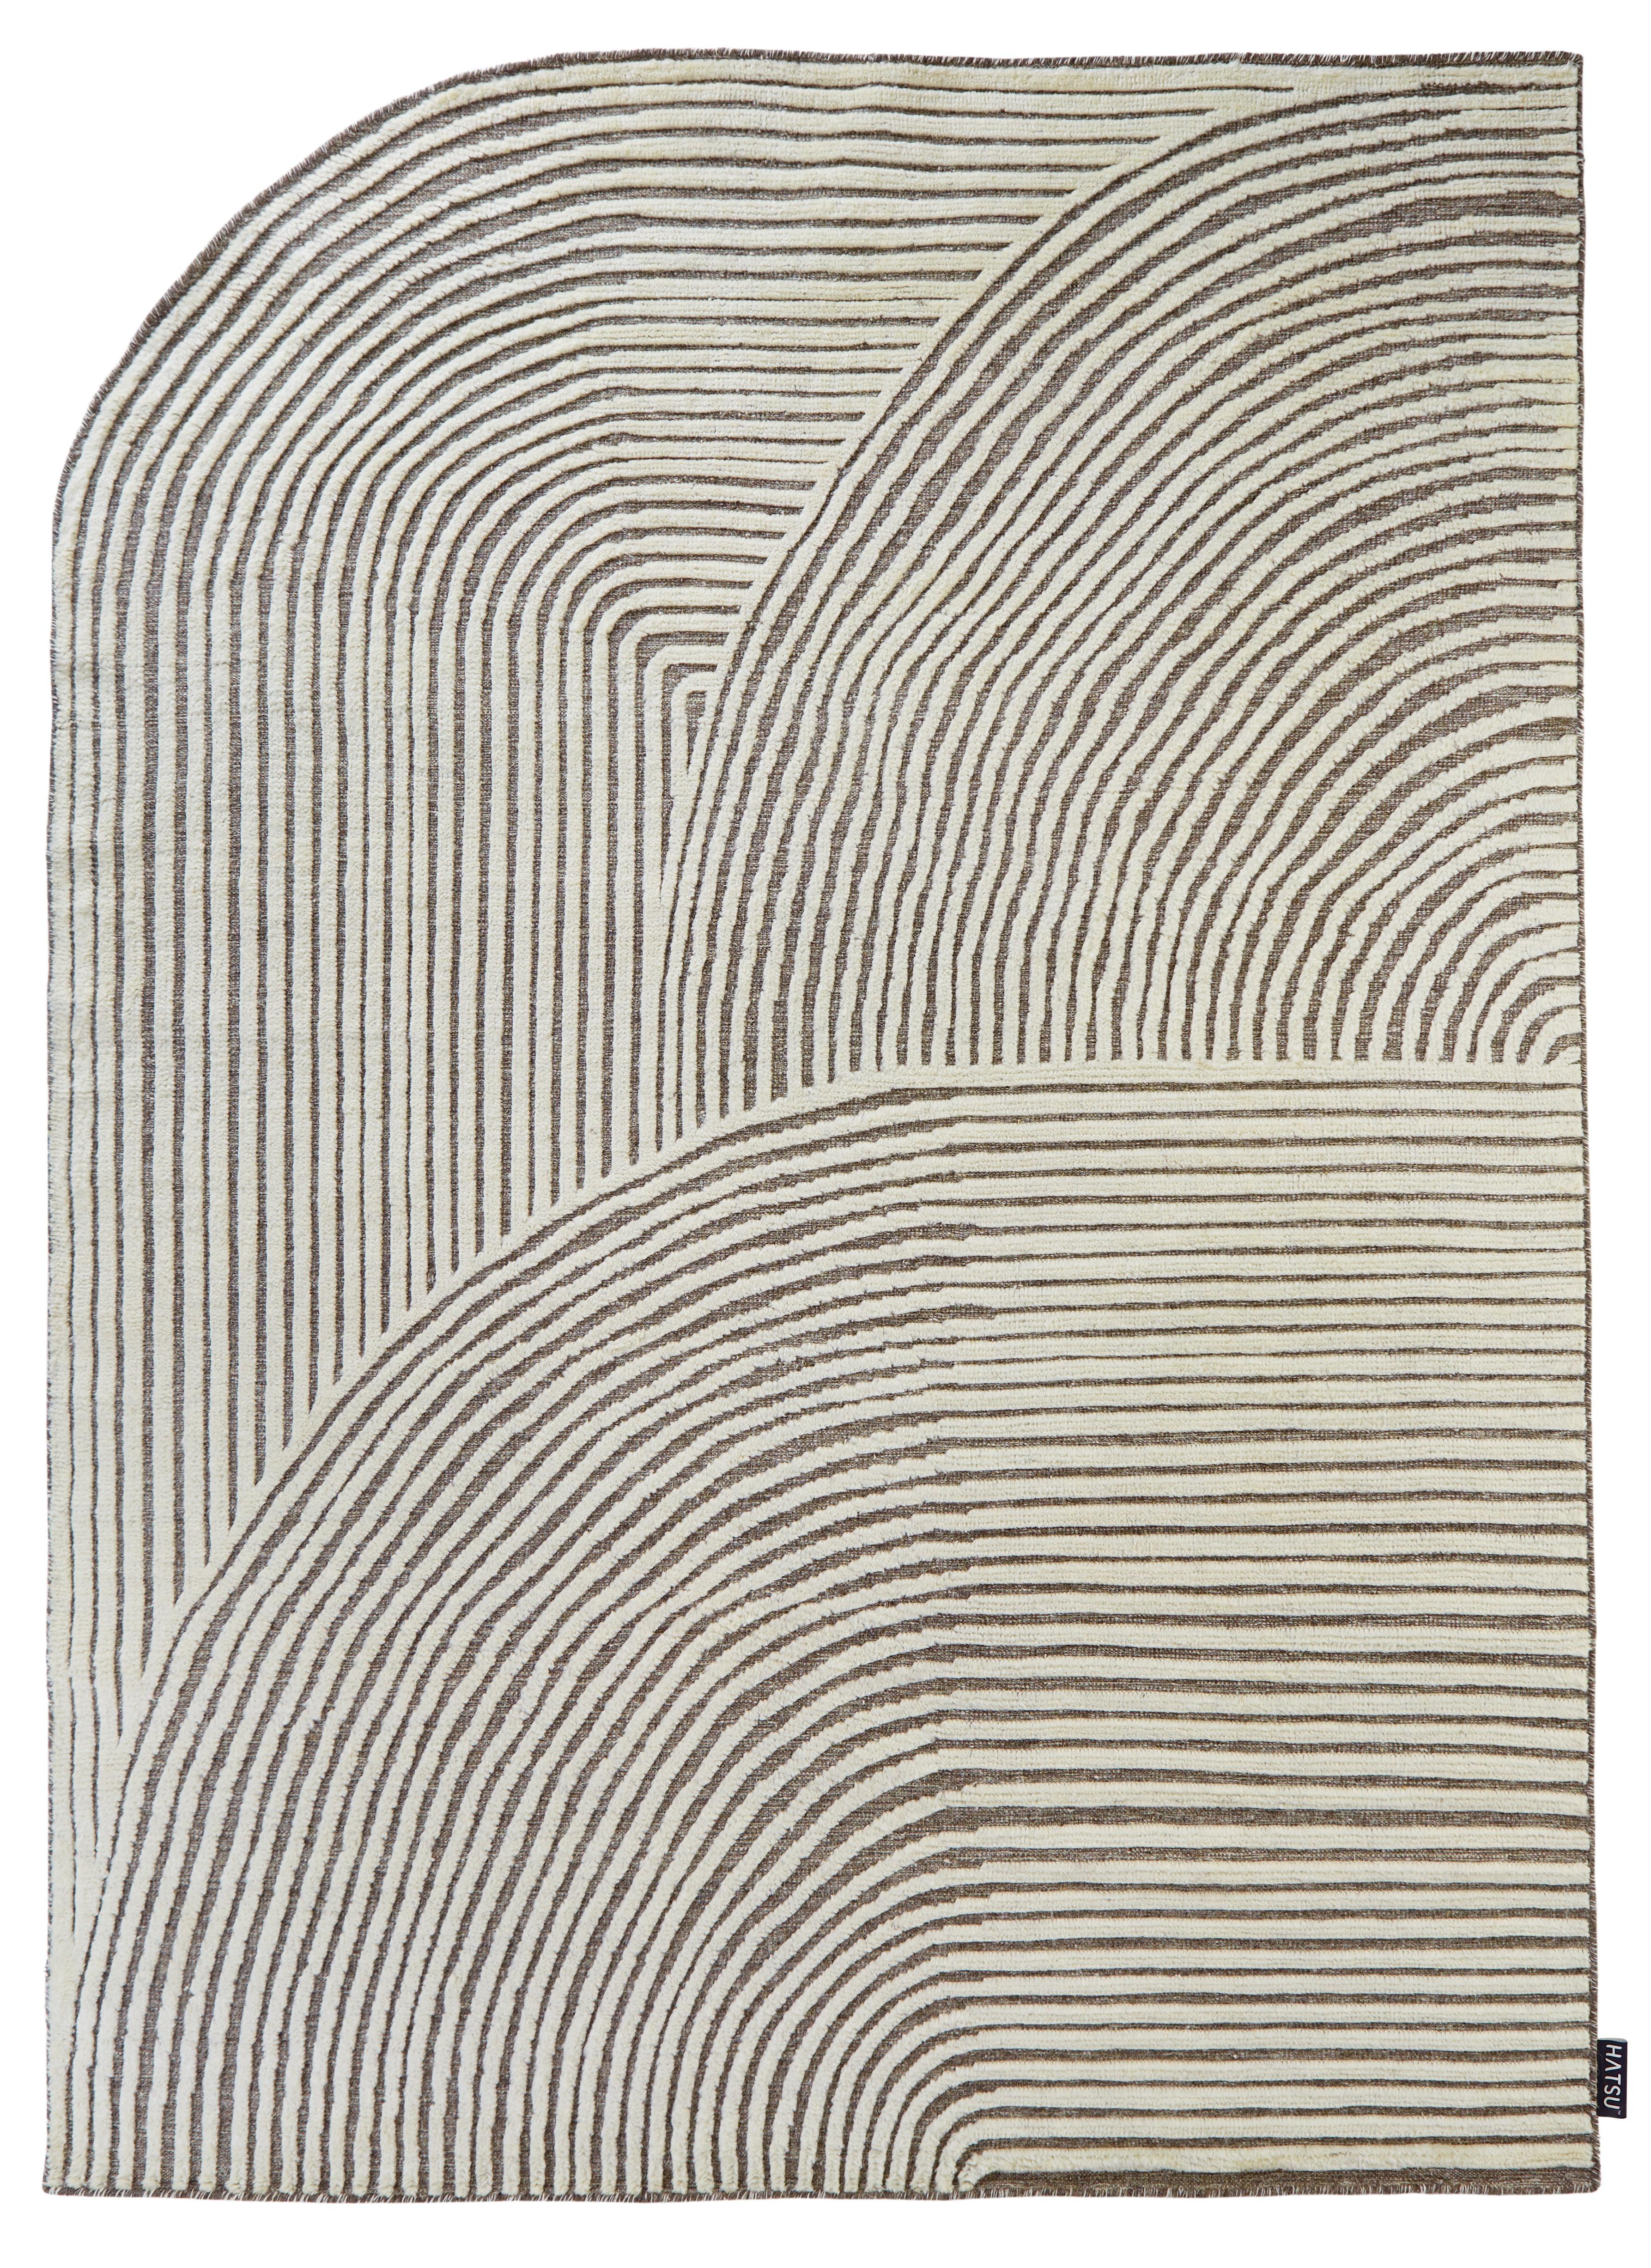 Hand Knotted Irreguler rug by Hatsu
Dimensions: D 179 x W 249 cm 
Materials: Wool

Hatsu is a design studio based in Mumbai that creates modern lighting that are unique and immediately recognisable. We started with an idea to make good design